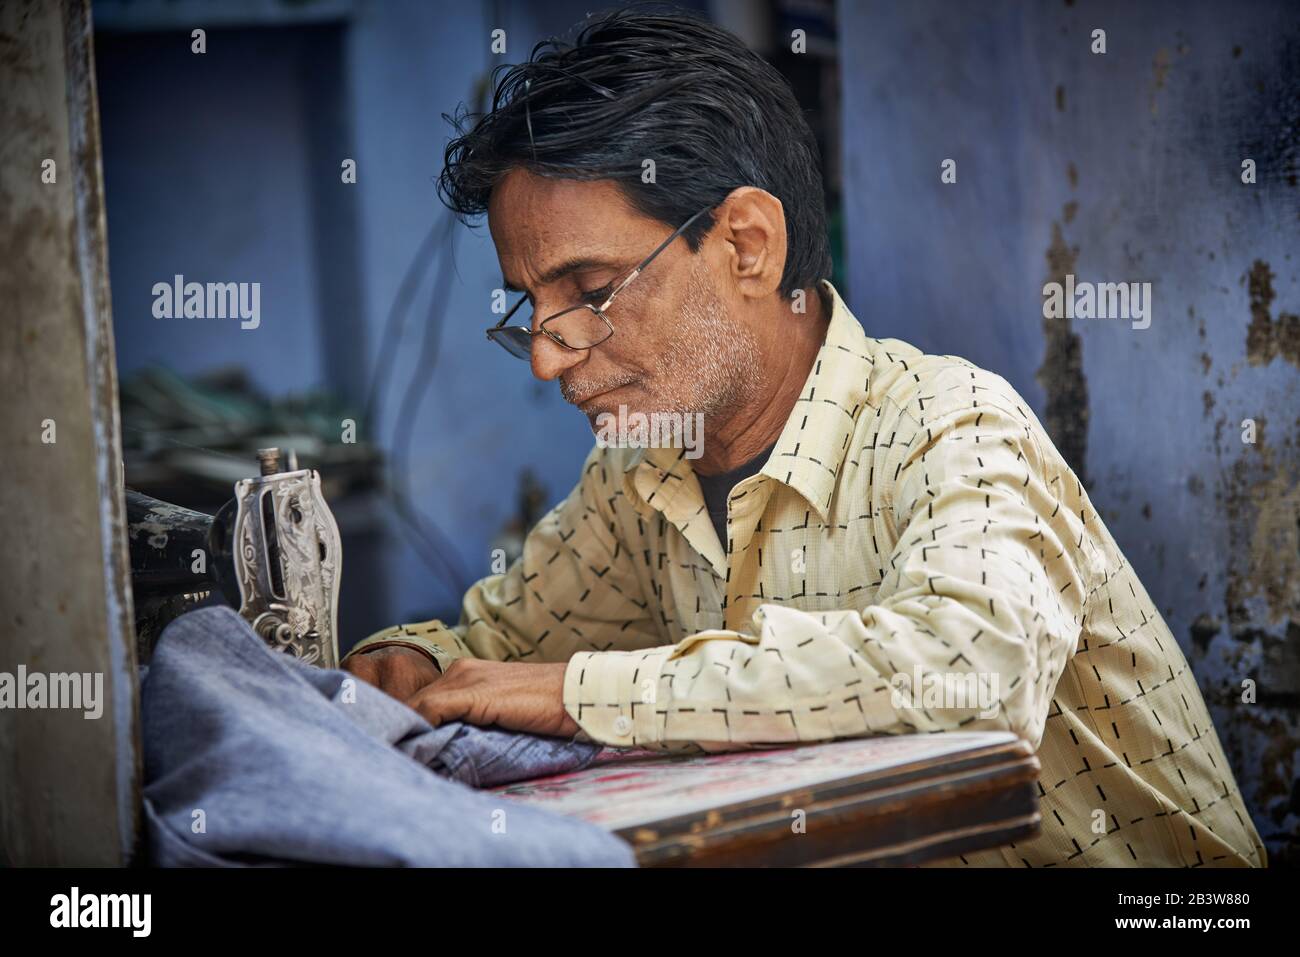 Portrait of a tailor on his sewing machine against a blue background, Bikaner, Rajasthan, India Stock Photo